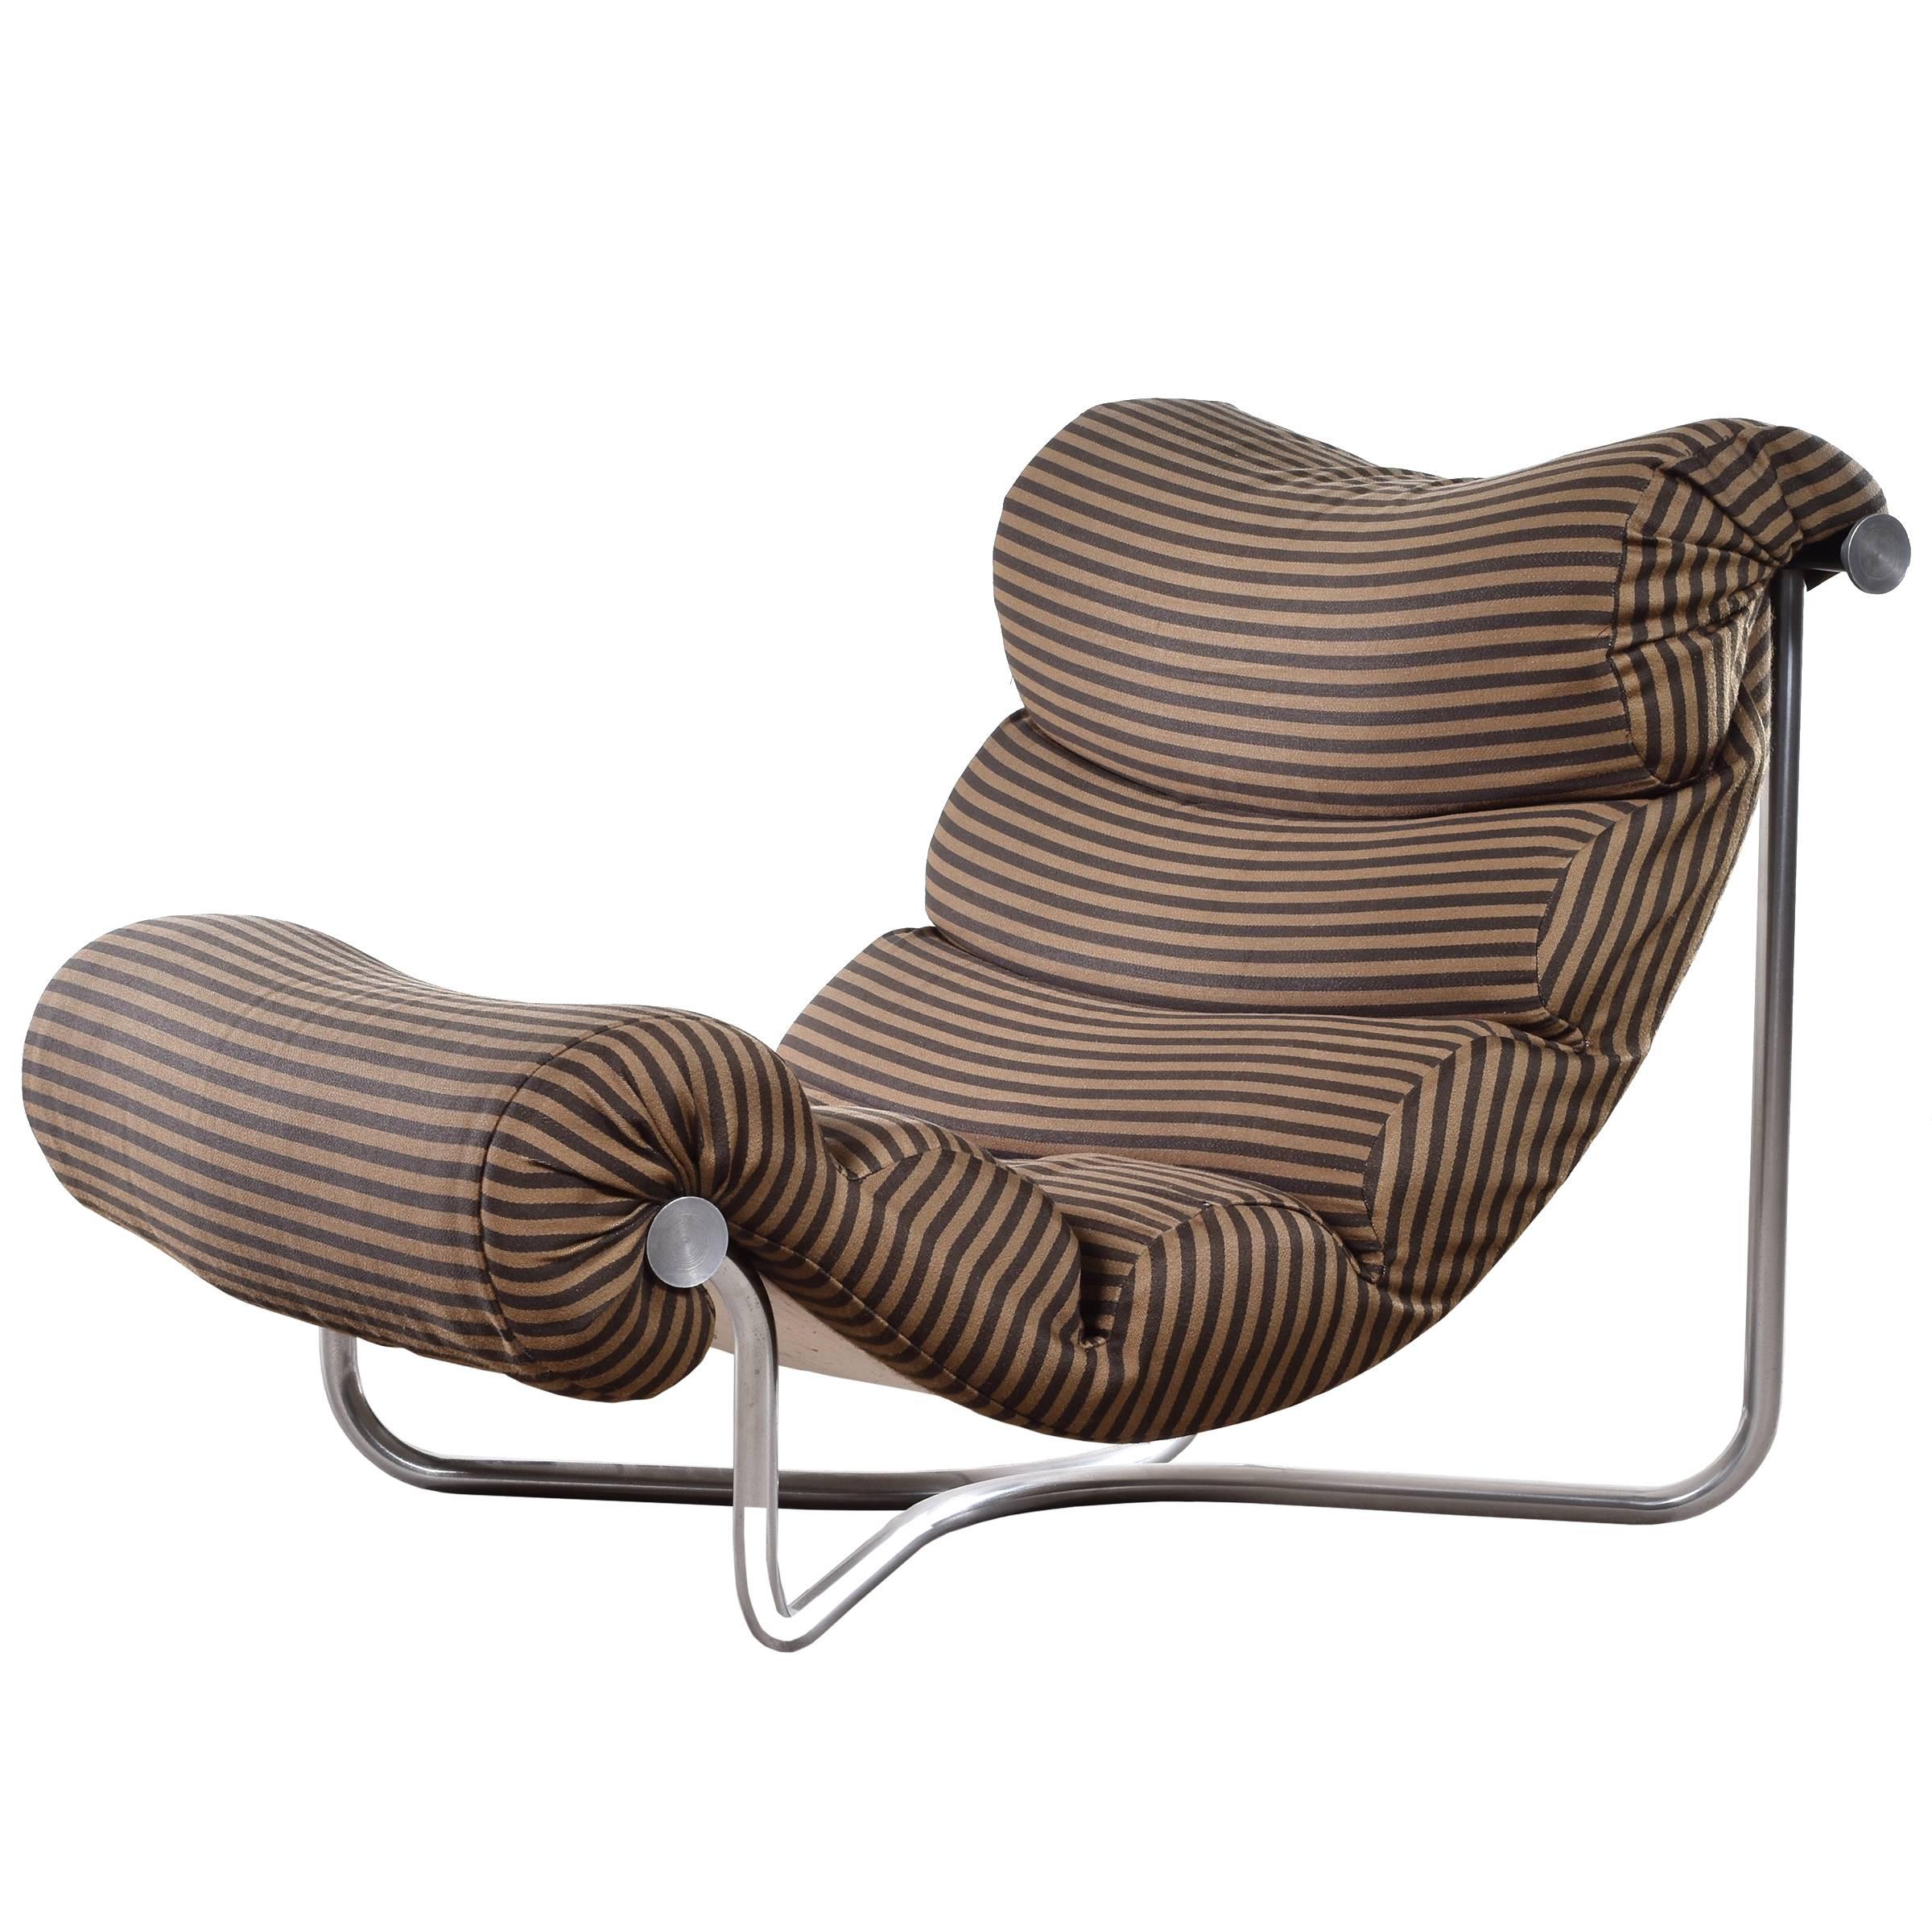 Georges van Rijck Glasgow Lounge Chair for Beaufort